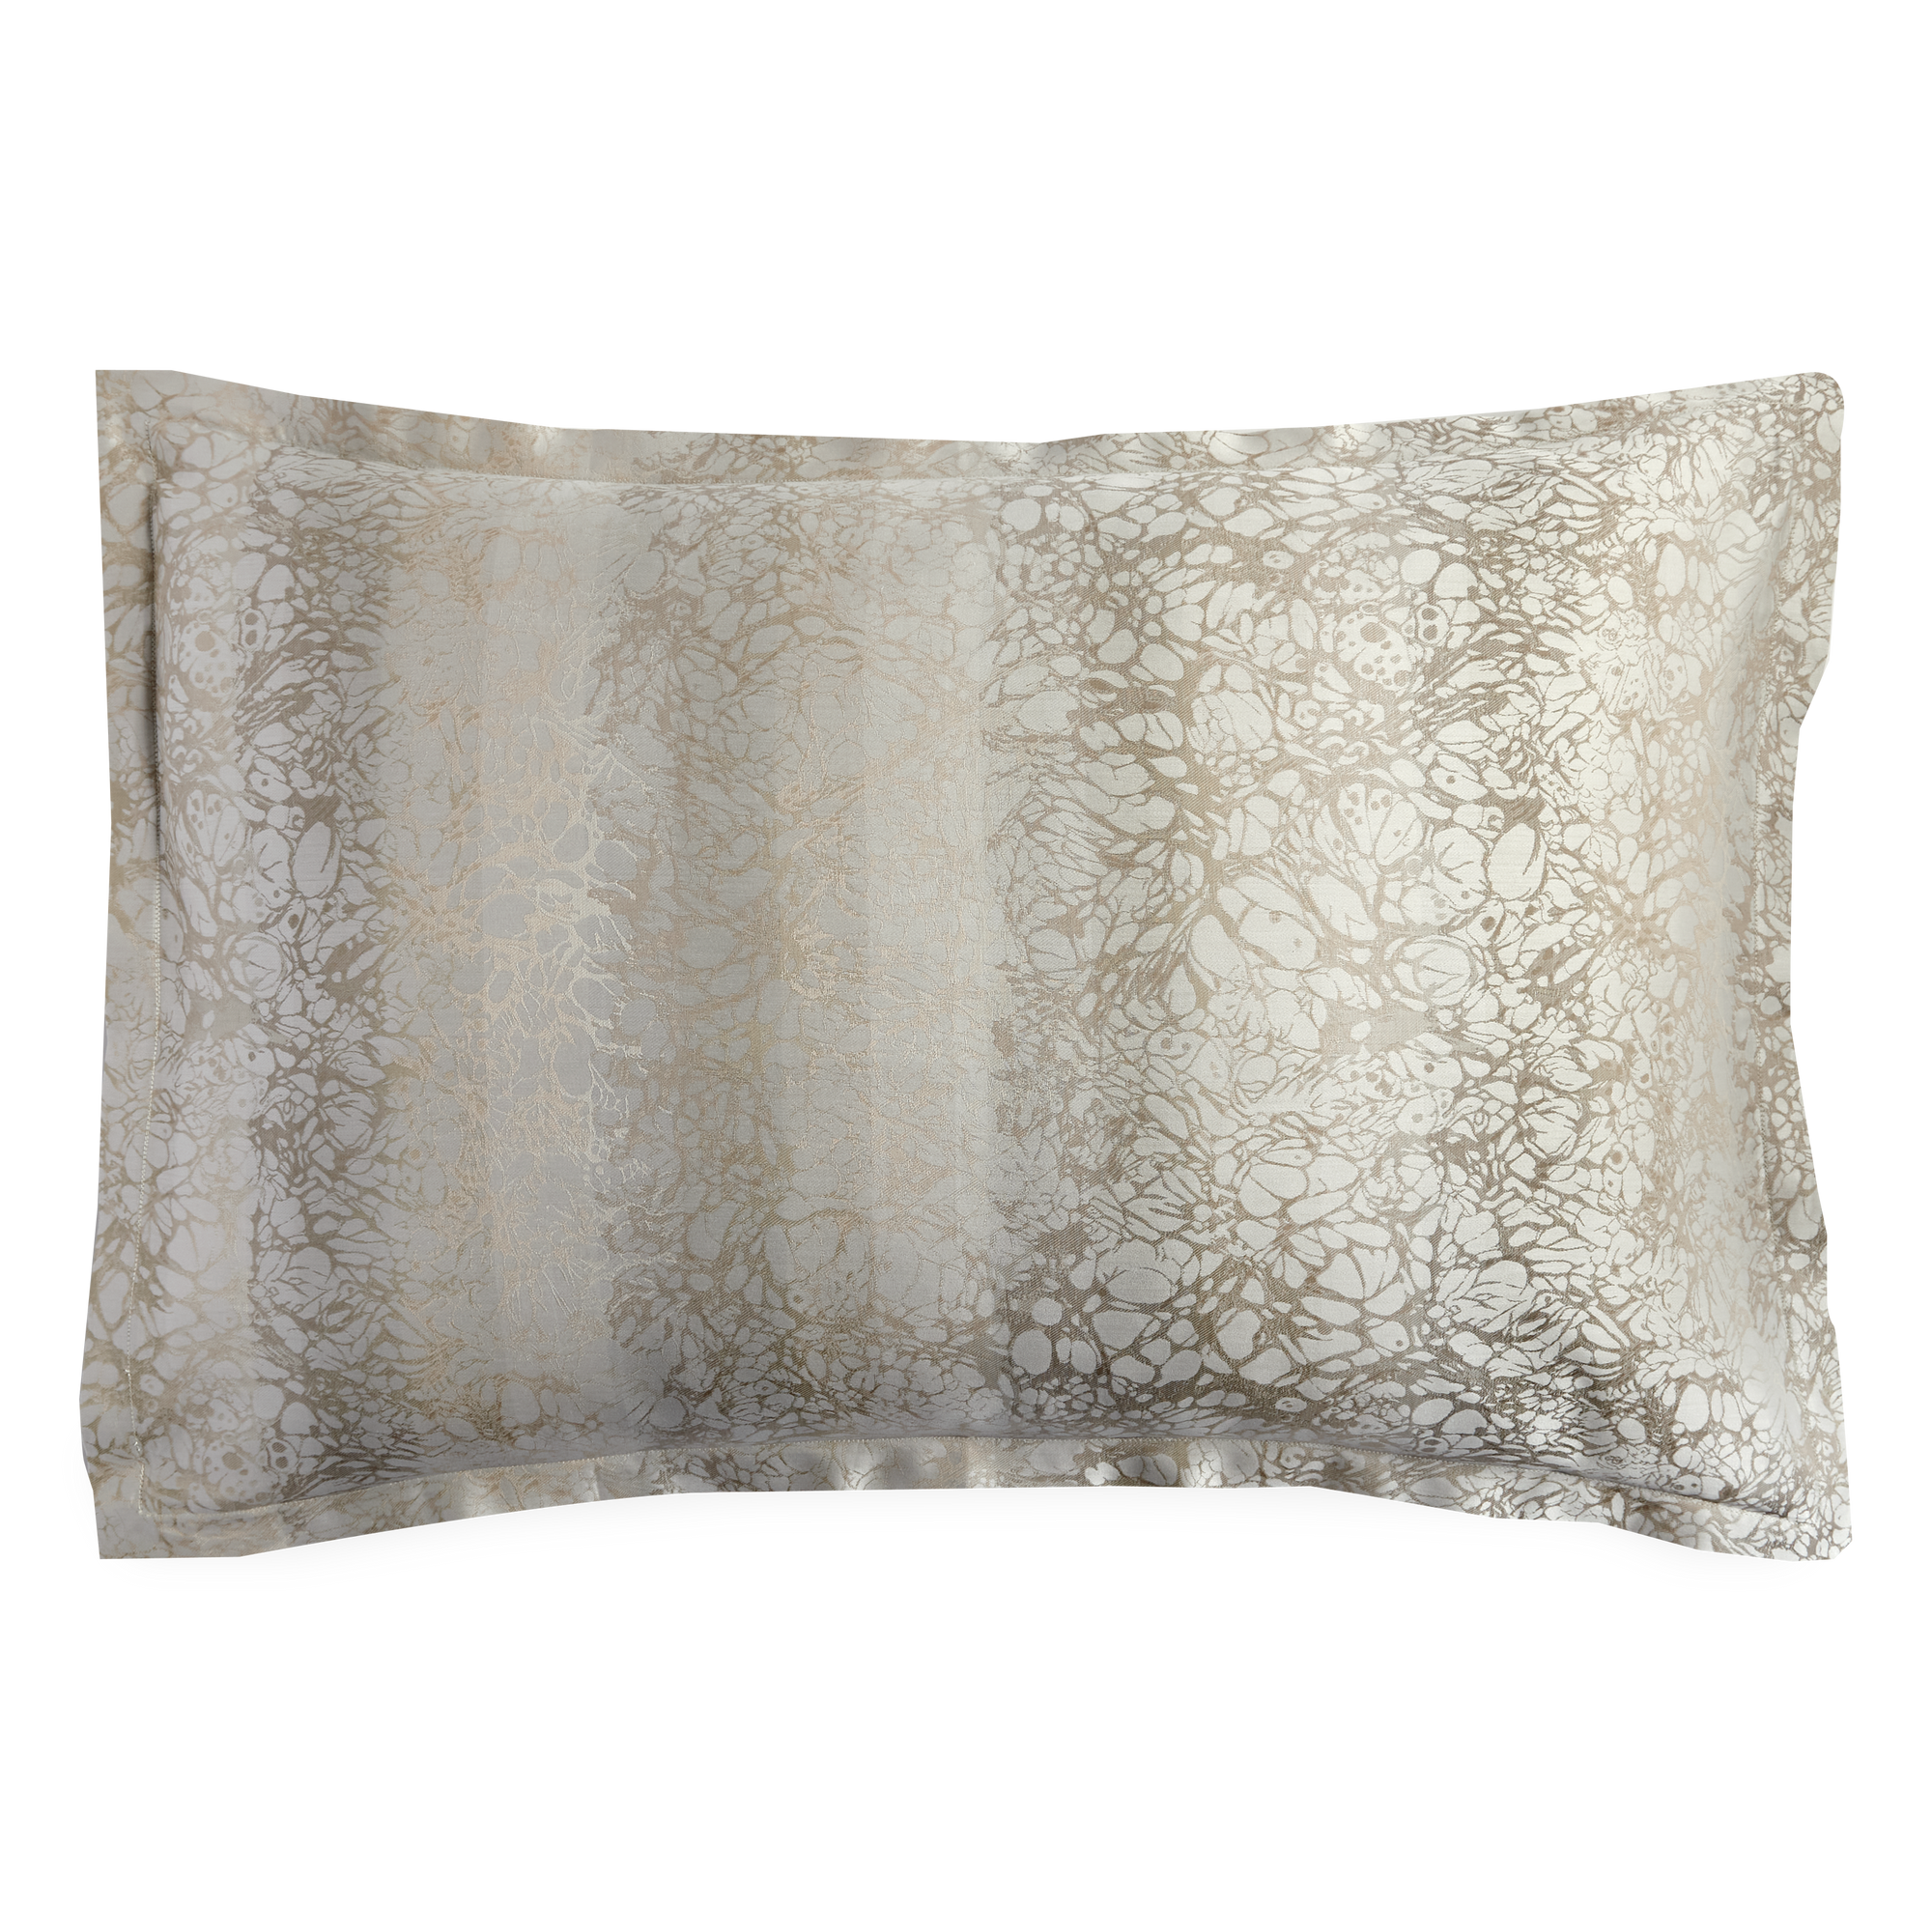 Produced in Italy exclusively for Elte, the Petal Collection's subtle floral motifs are blended in a neutral ivory palette, woven in a yarn dyed sateen jacquard.